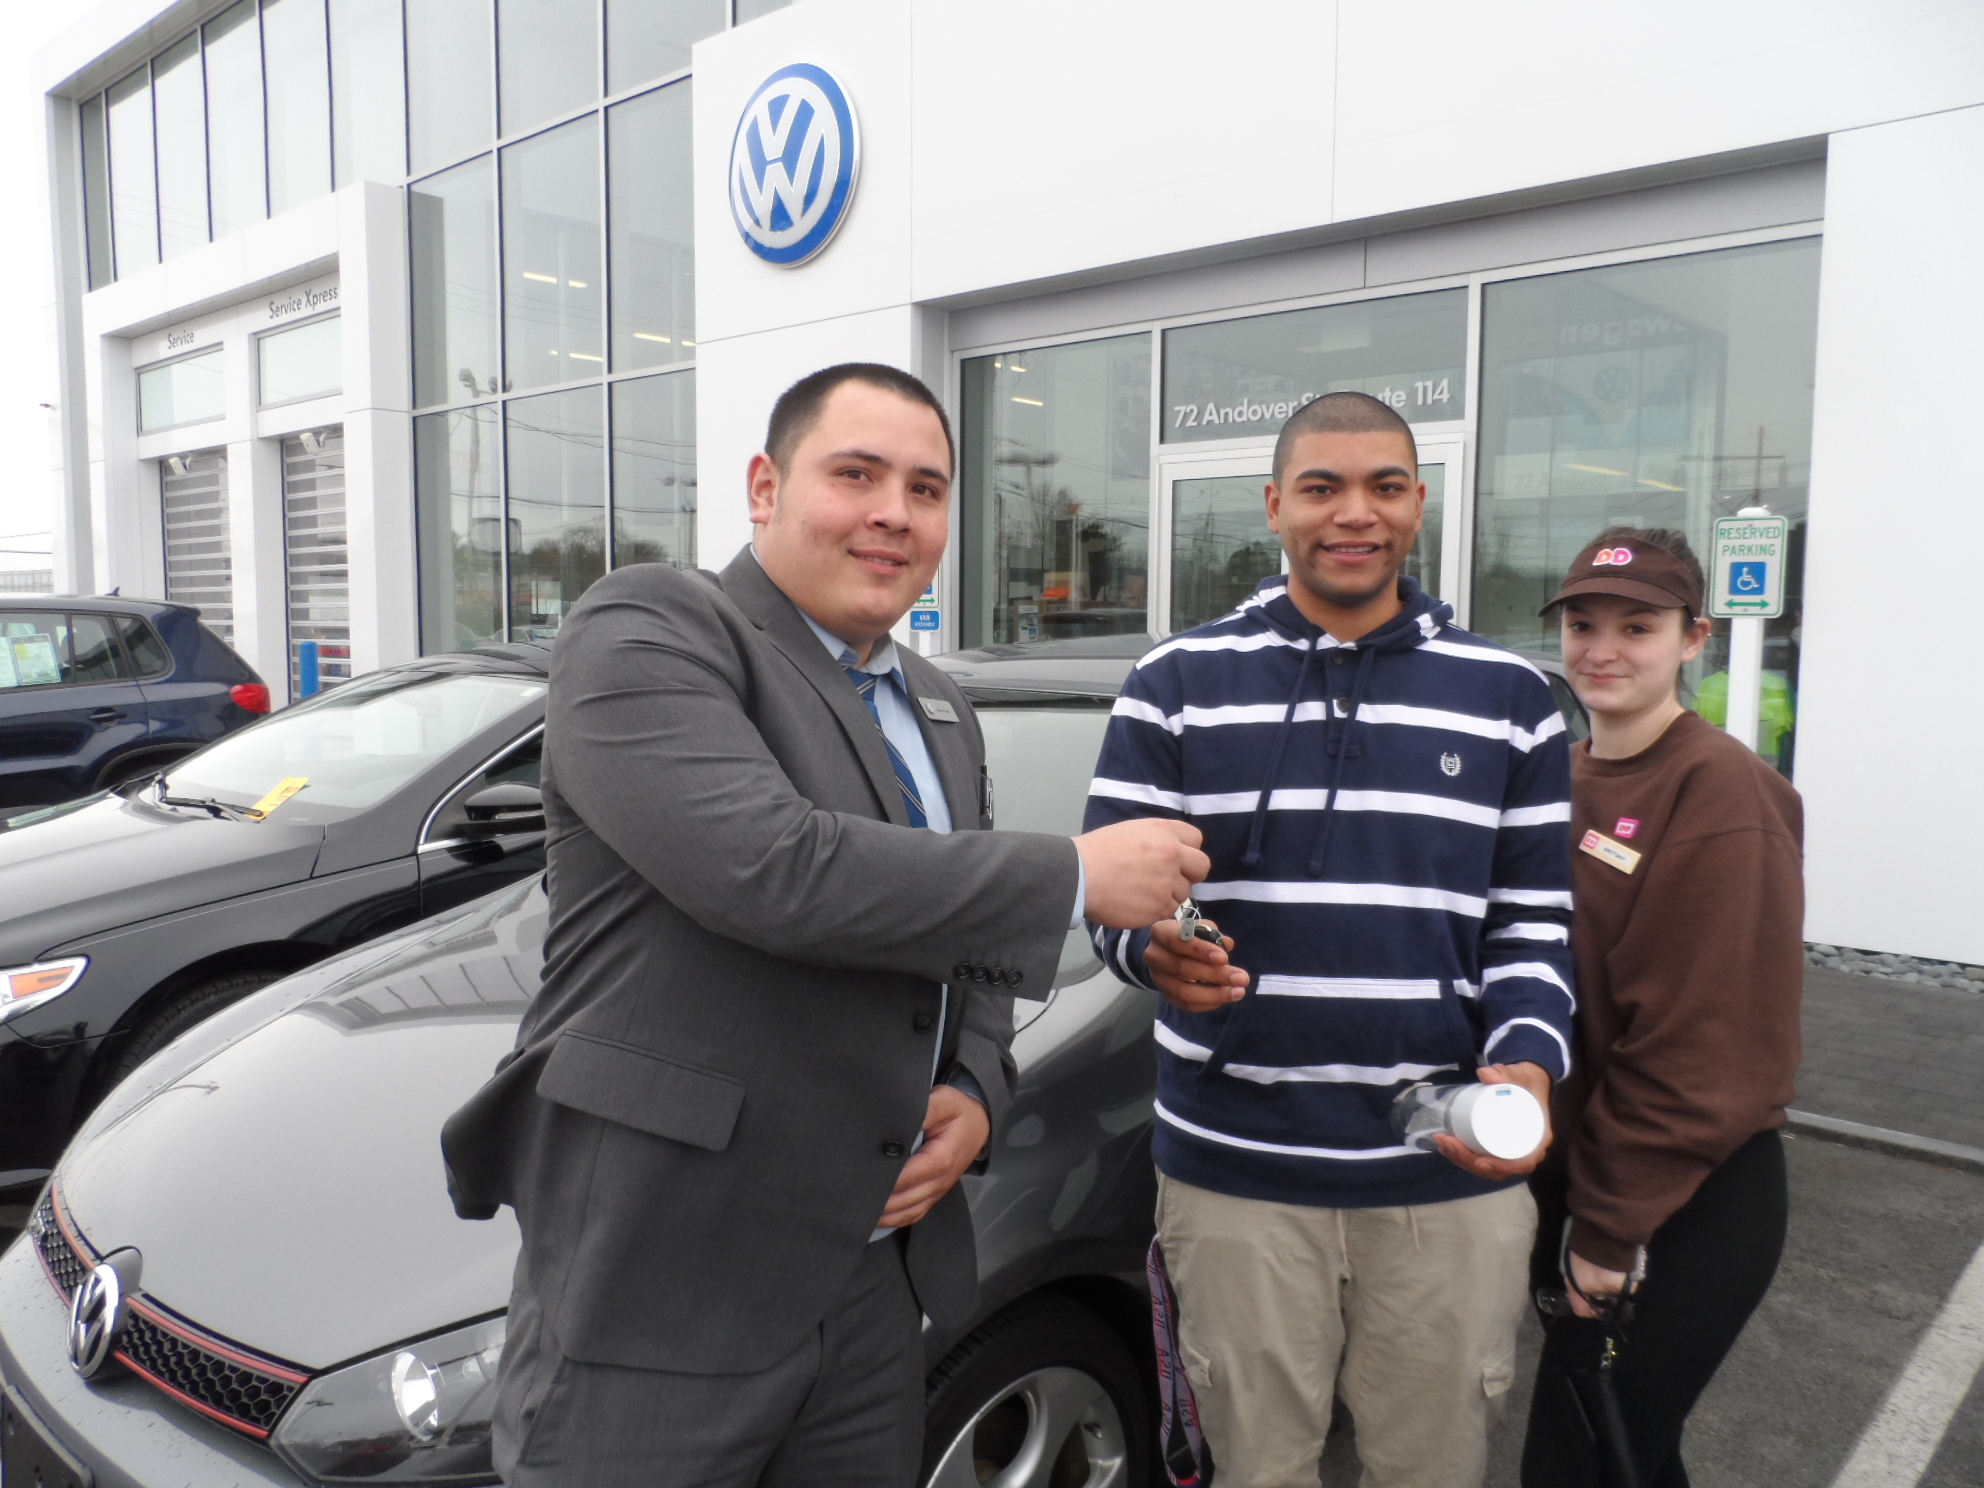 Our customers love working with our team at Kelly Volkswagen. Here, you'll see our Product Specialist Josh (left) along with happy customers Giovanni and Brittany who both purchased Volkswagen vehicles at our dealership. They both loved their experience and we couldn't have been more happy to help find them the perfect vehicles for their needs.